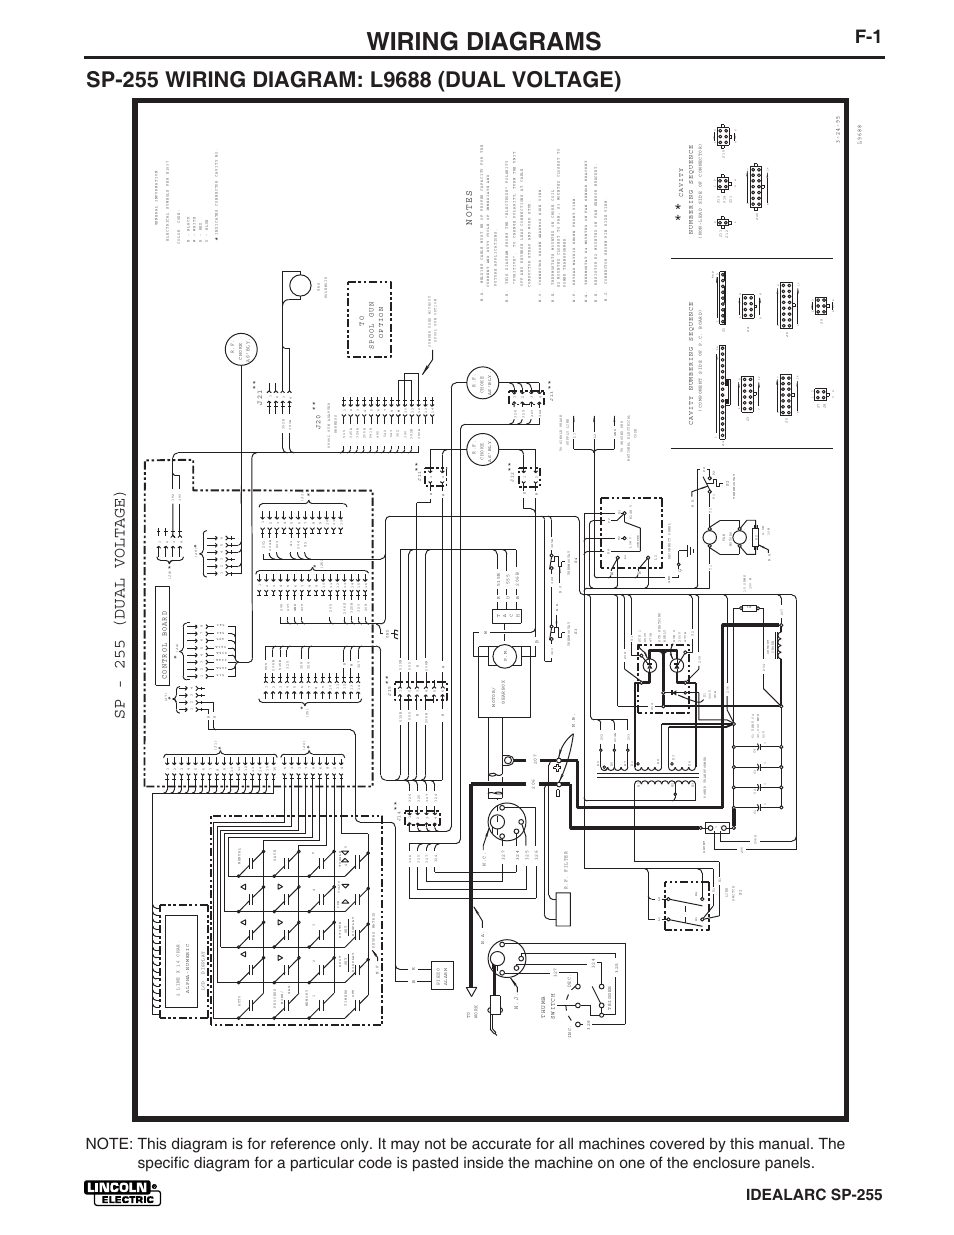 Miller Welder Wiring Diagram from www.pdfmanuales.com